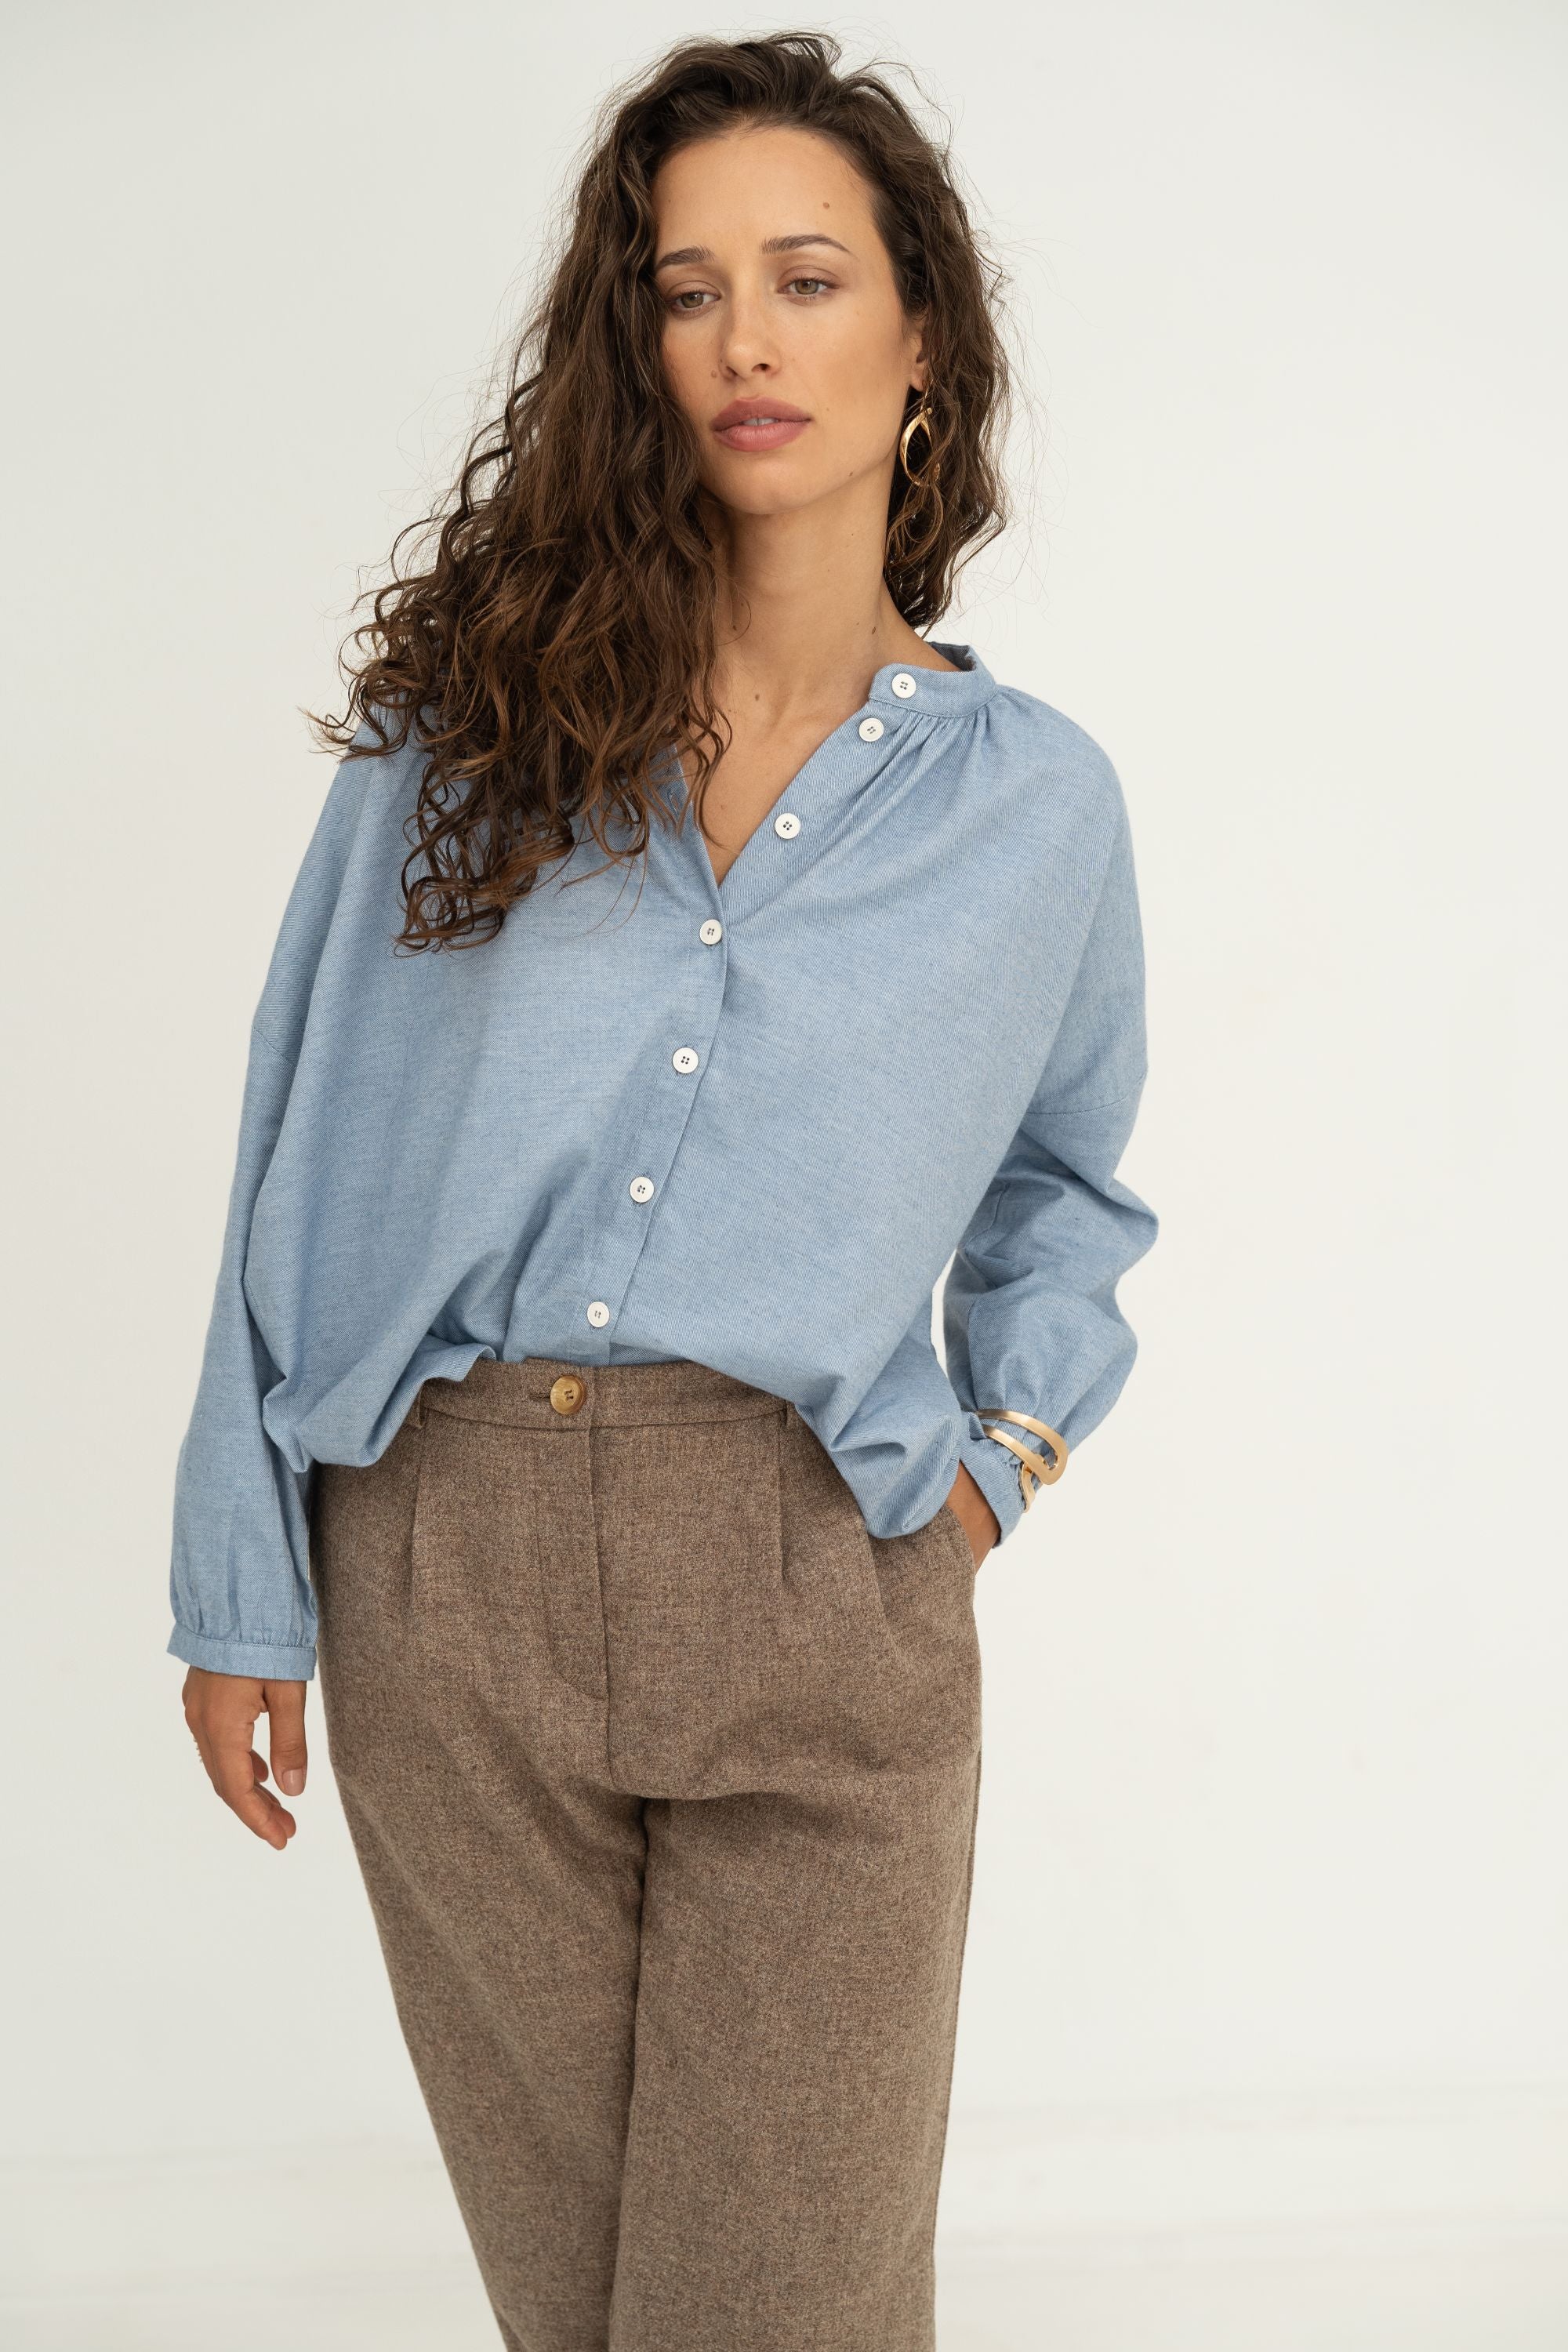 Naz long-sleeve buttoned blouse in wintery cotton-cashmere blend in blue. (Made from recycled materials).